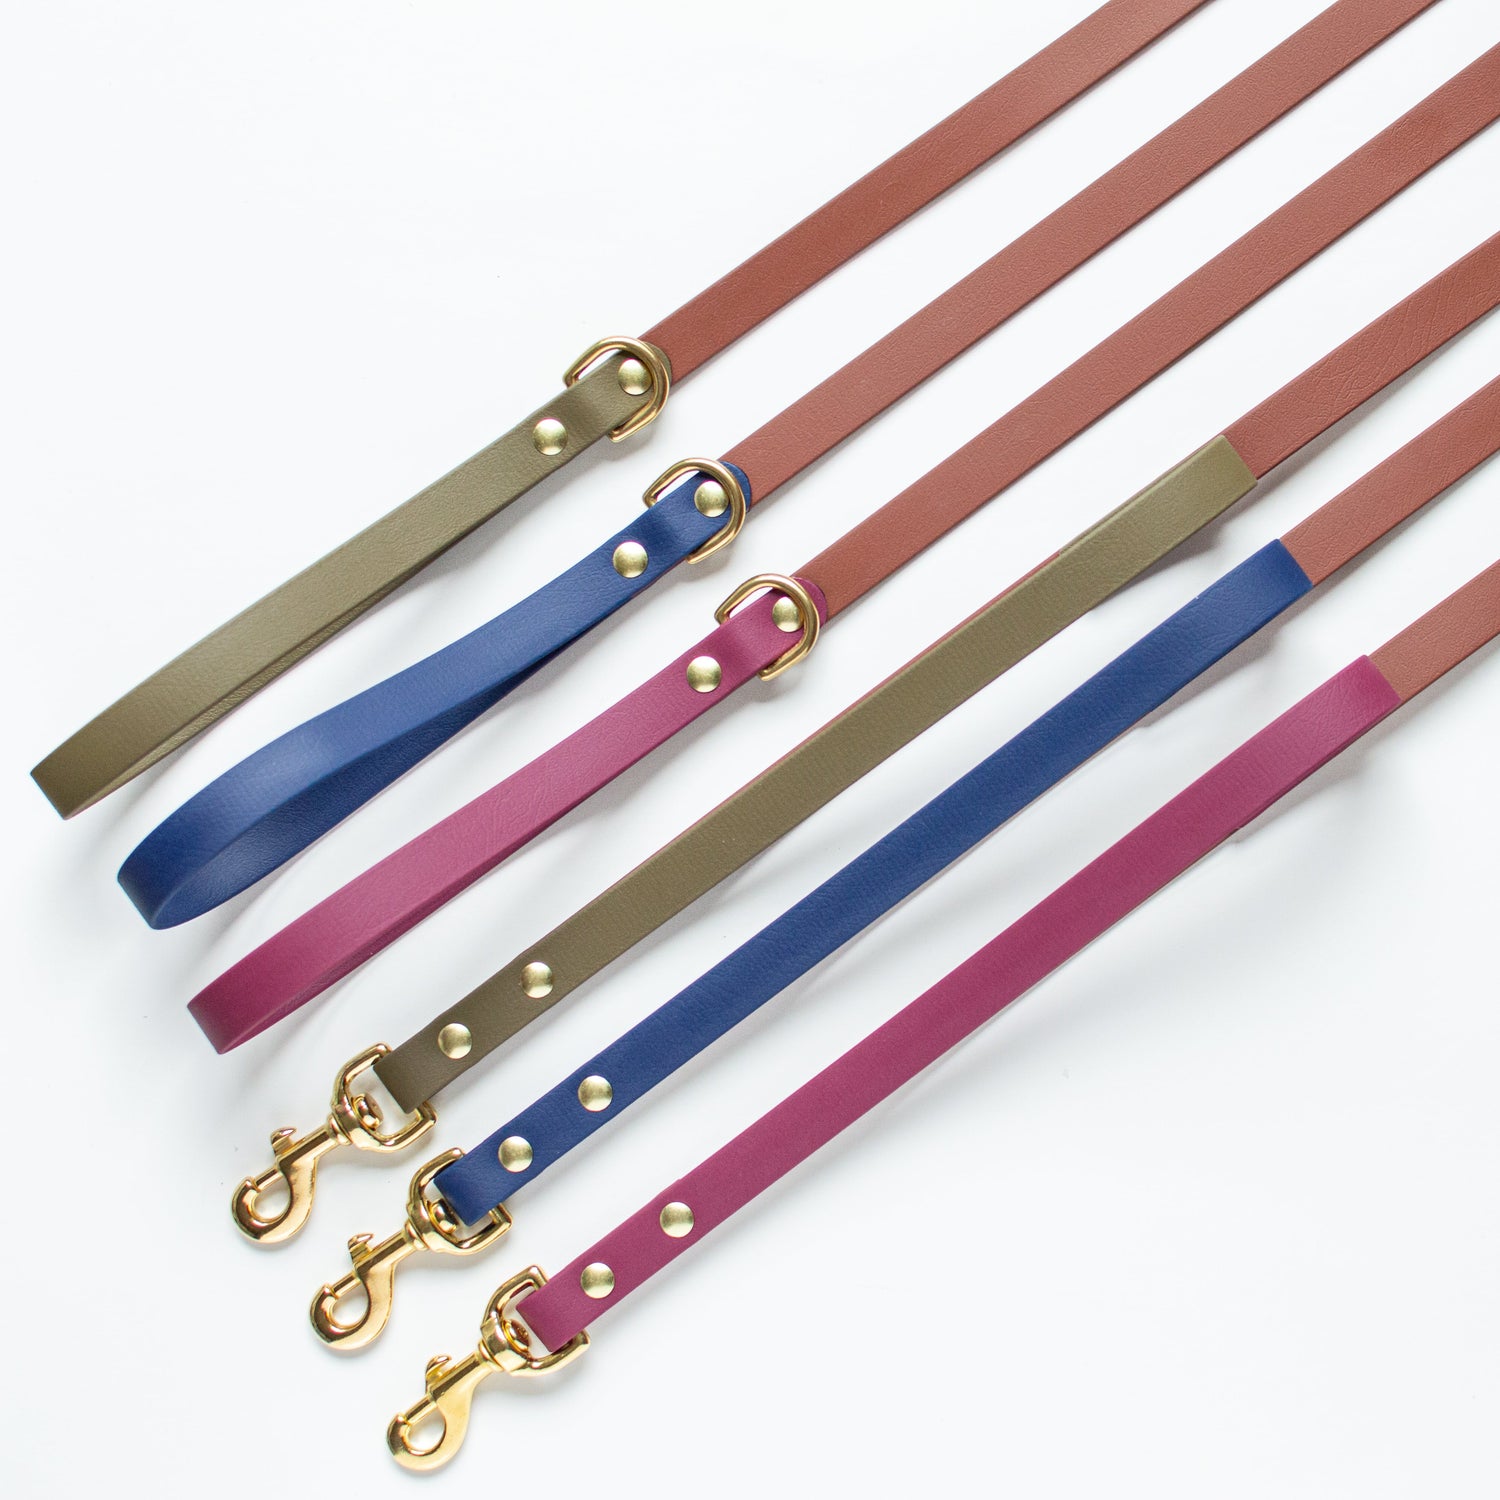 Two-tone Biothane Dog Collar and Leash Handmade in Canada using Biothane and solid brass hardware. Waterprood, odourproof, easy to clean